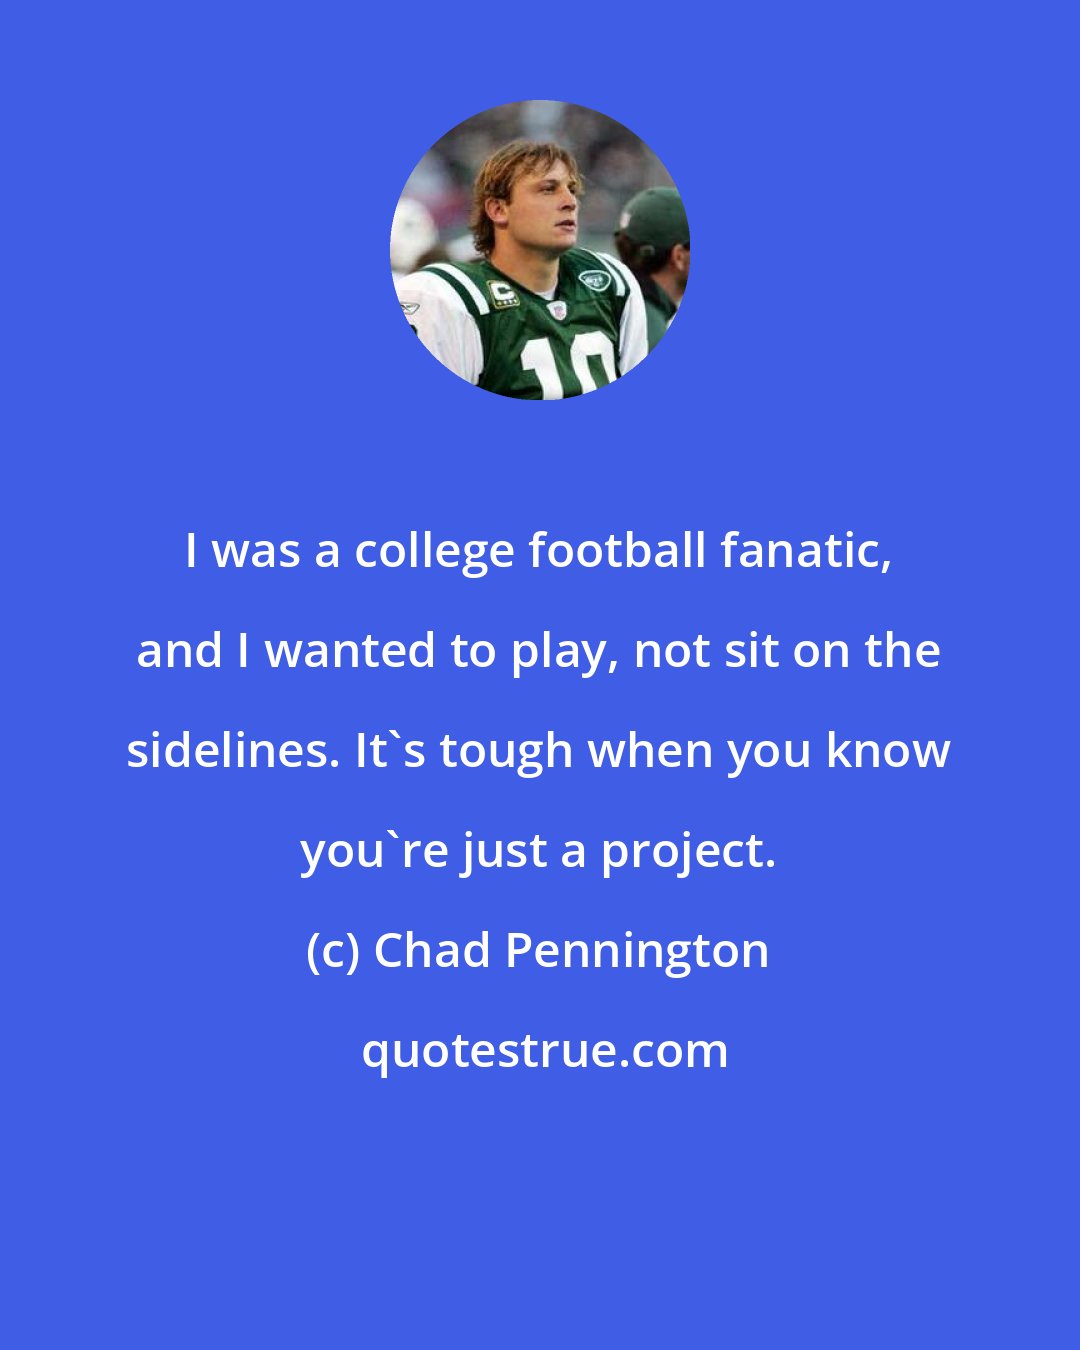 Chad Pennington: I was a college football fanatic, and I wanted to play, not sit on the sidelines. It's tough when you know you're just a project.